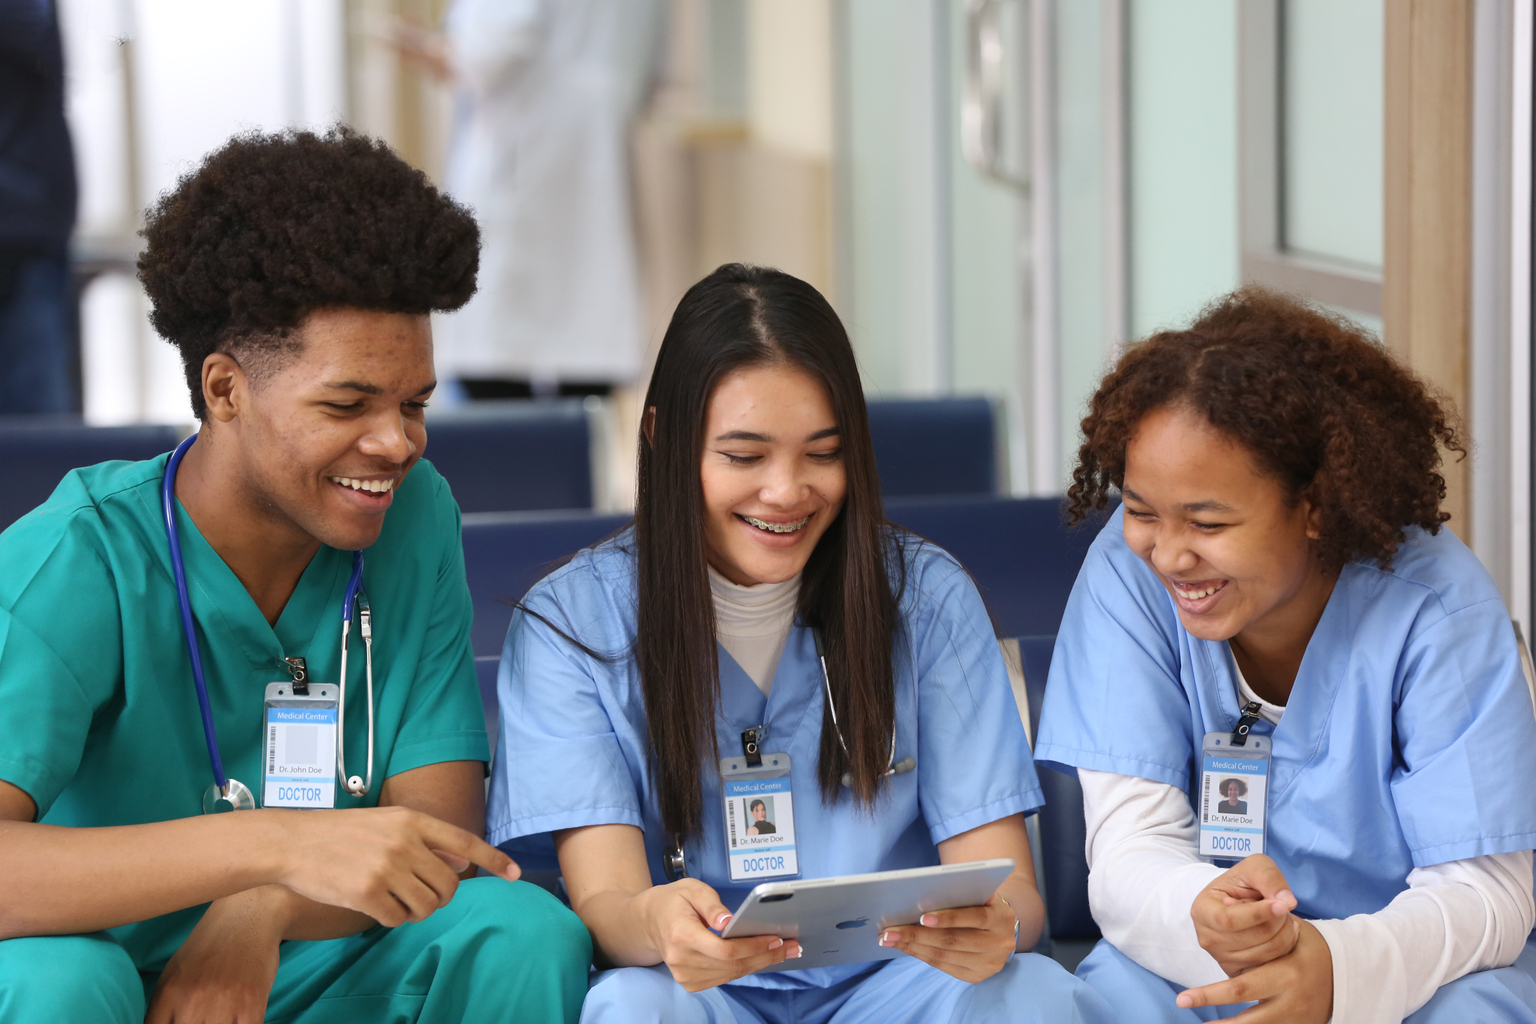 Group of smiling young doctors and nurses working at the hospital together